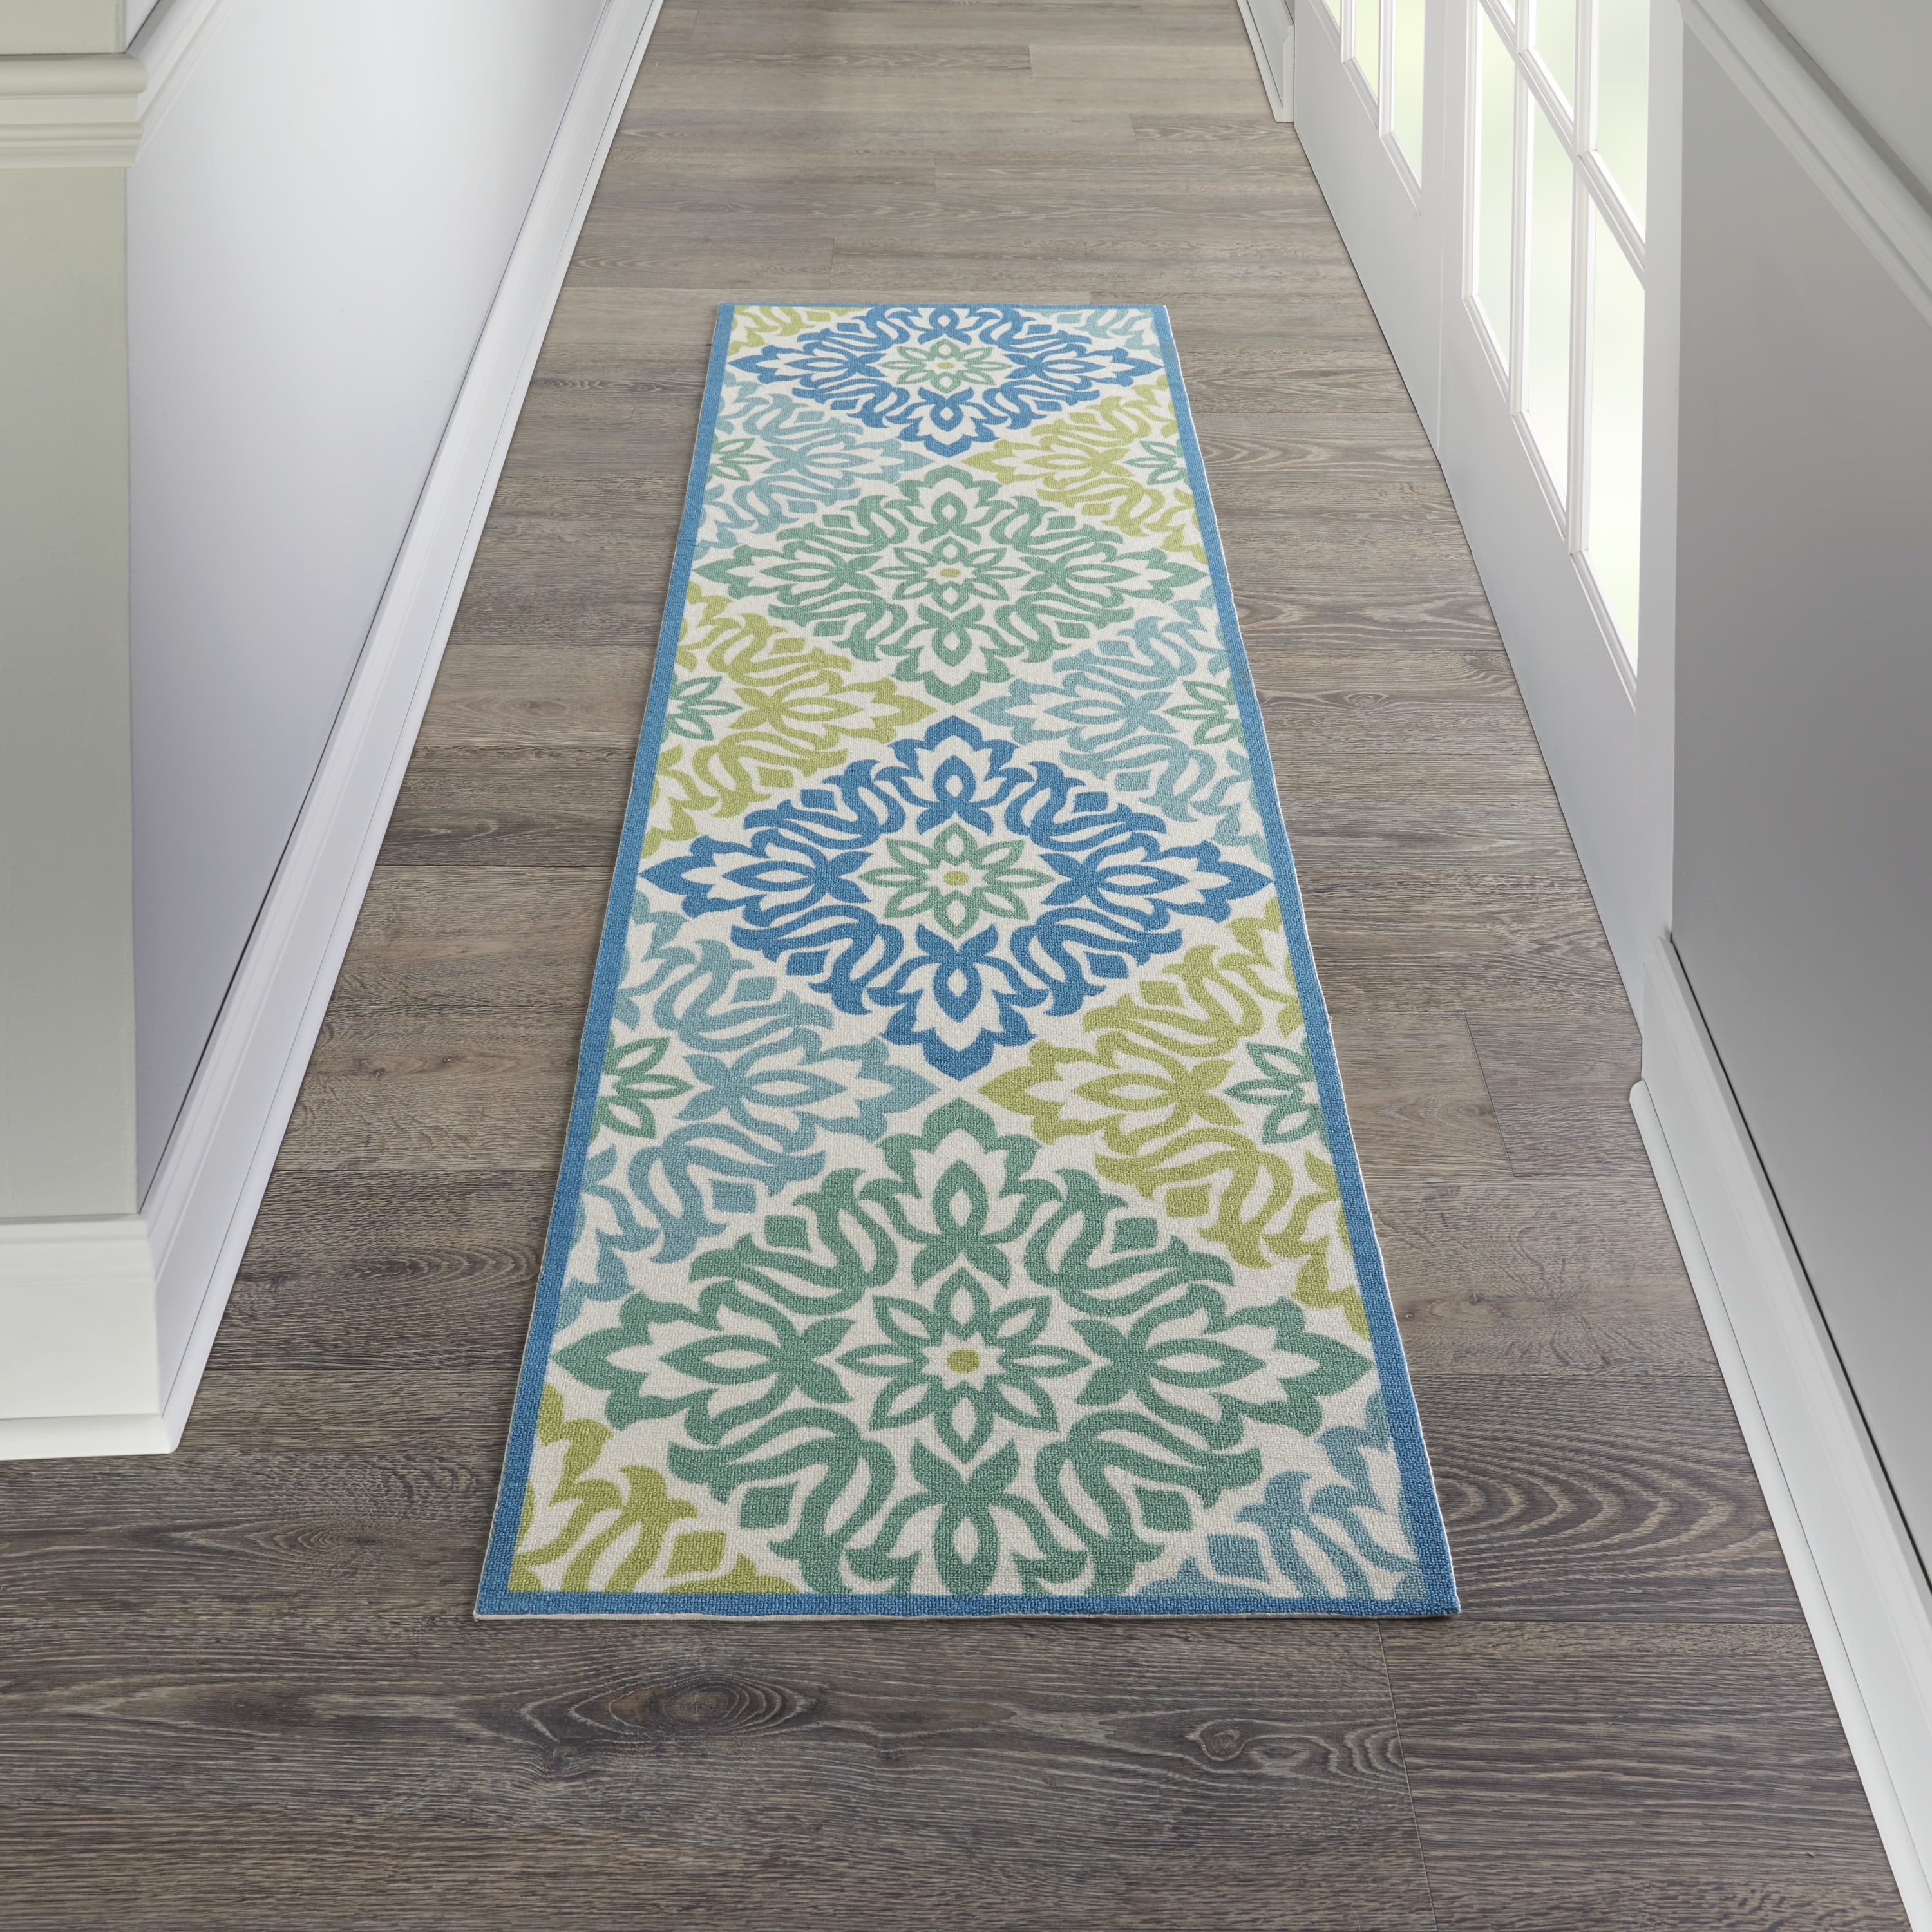 Details about   Teal Blue Rugs Modern Indoor Outdoor Patio Summer Home & Garden Washable Mats 